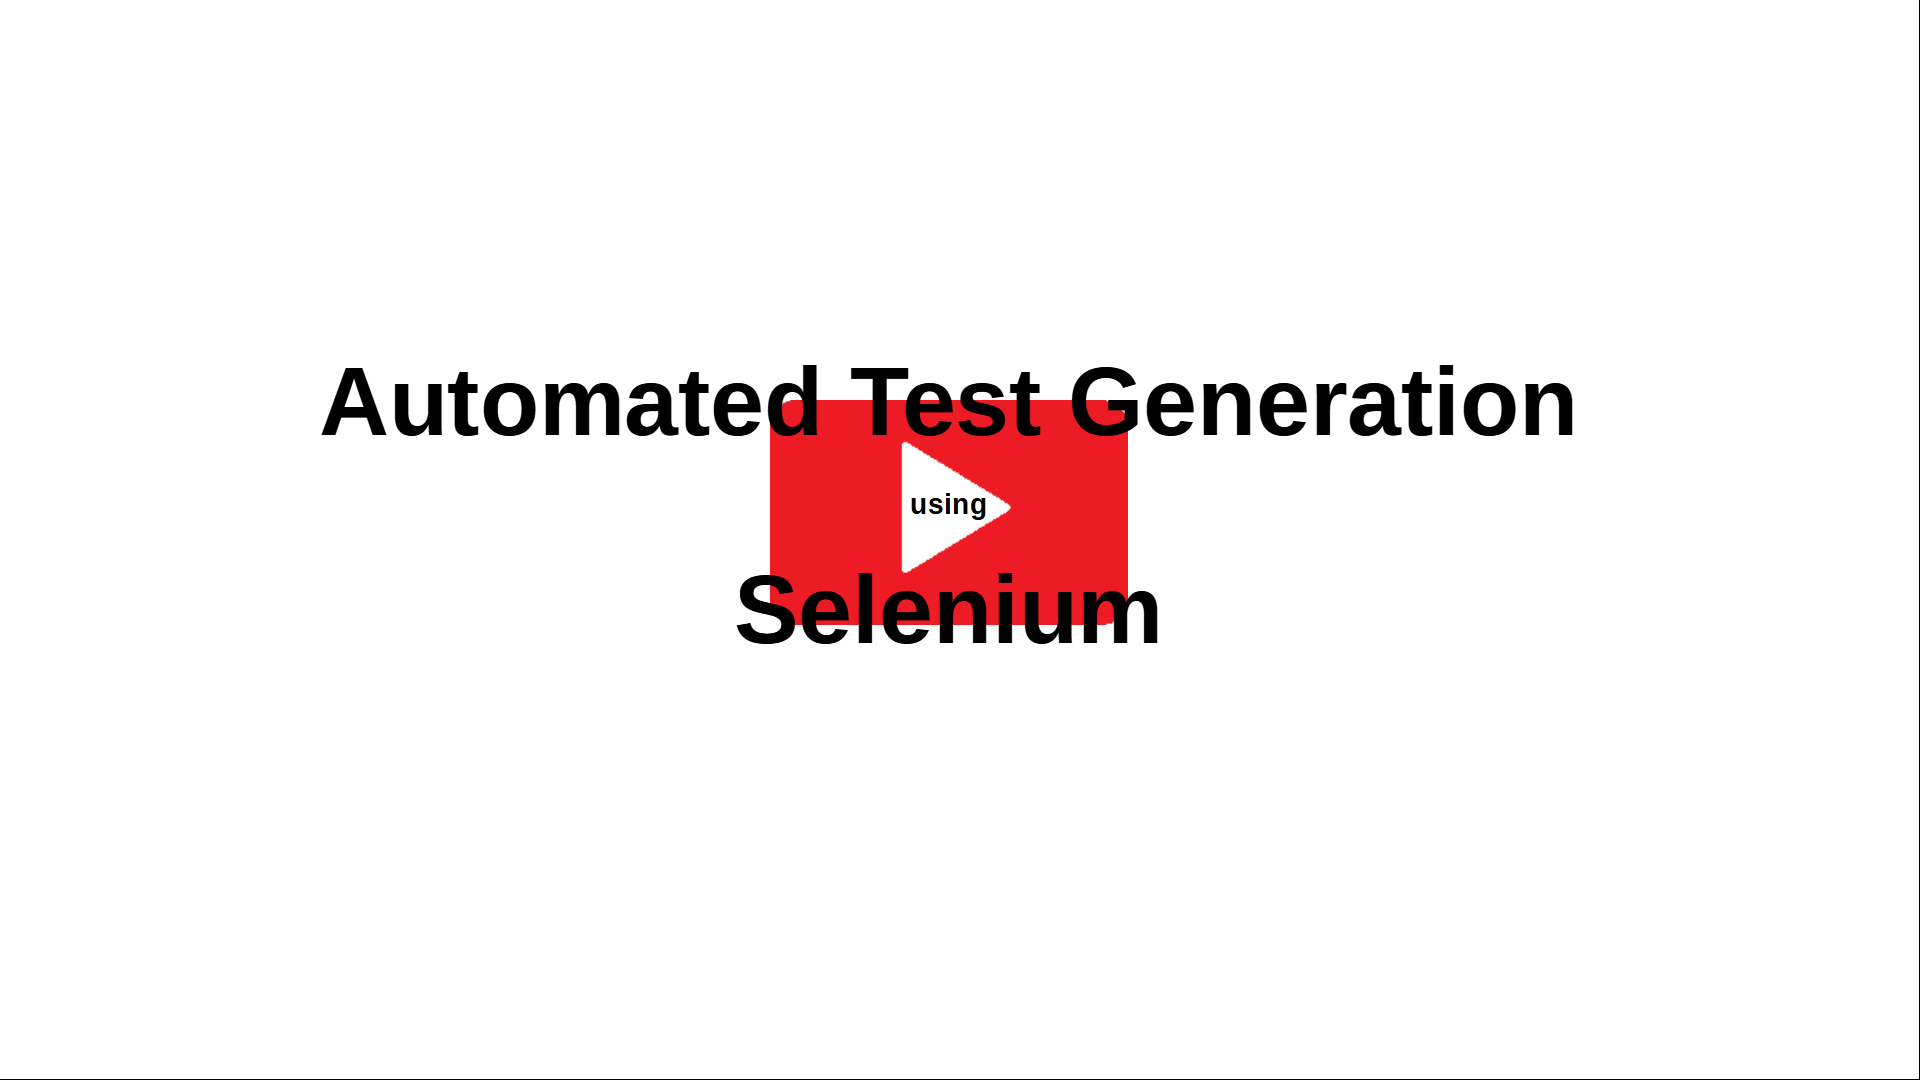 Test Generation with MyITest4U and Selenium using the structure of the HTML document